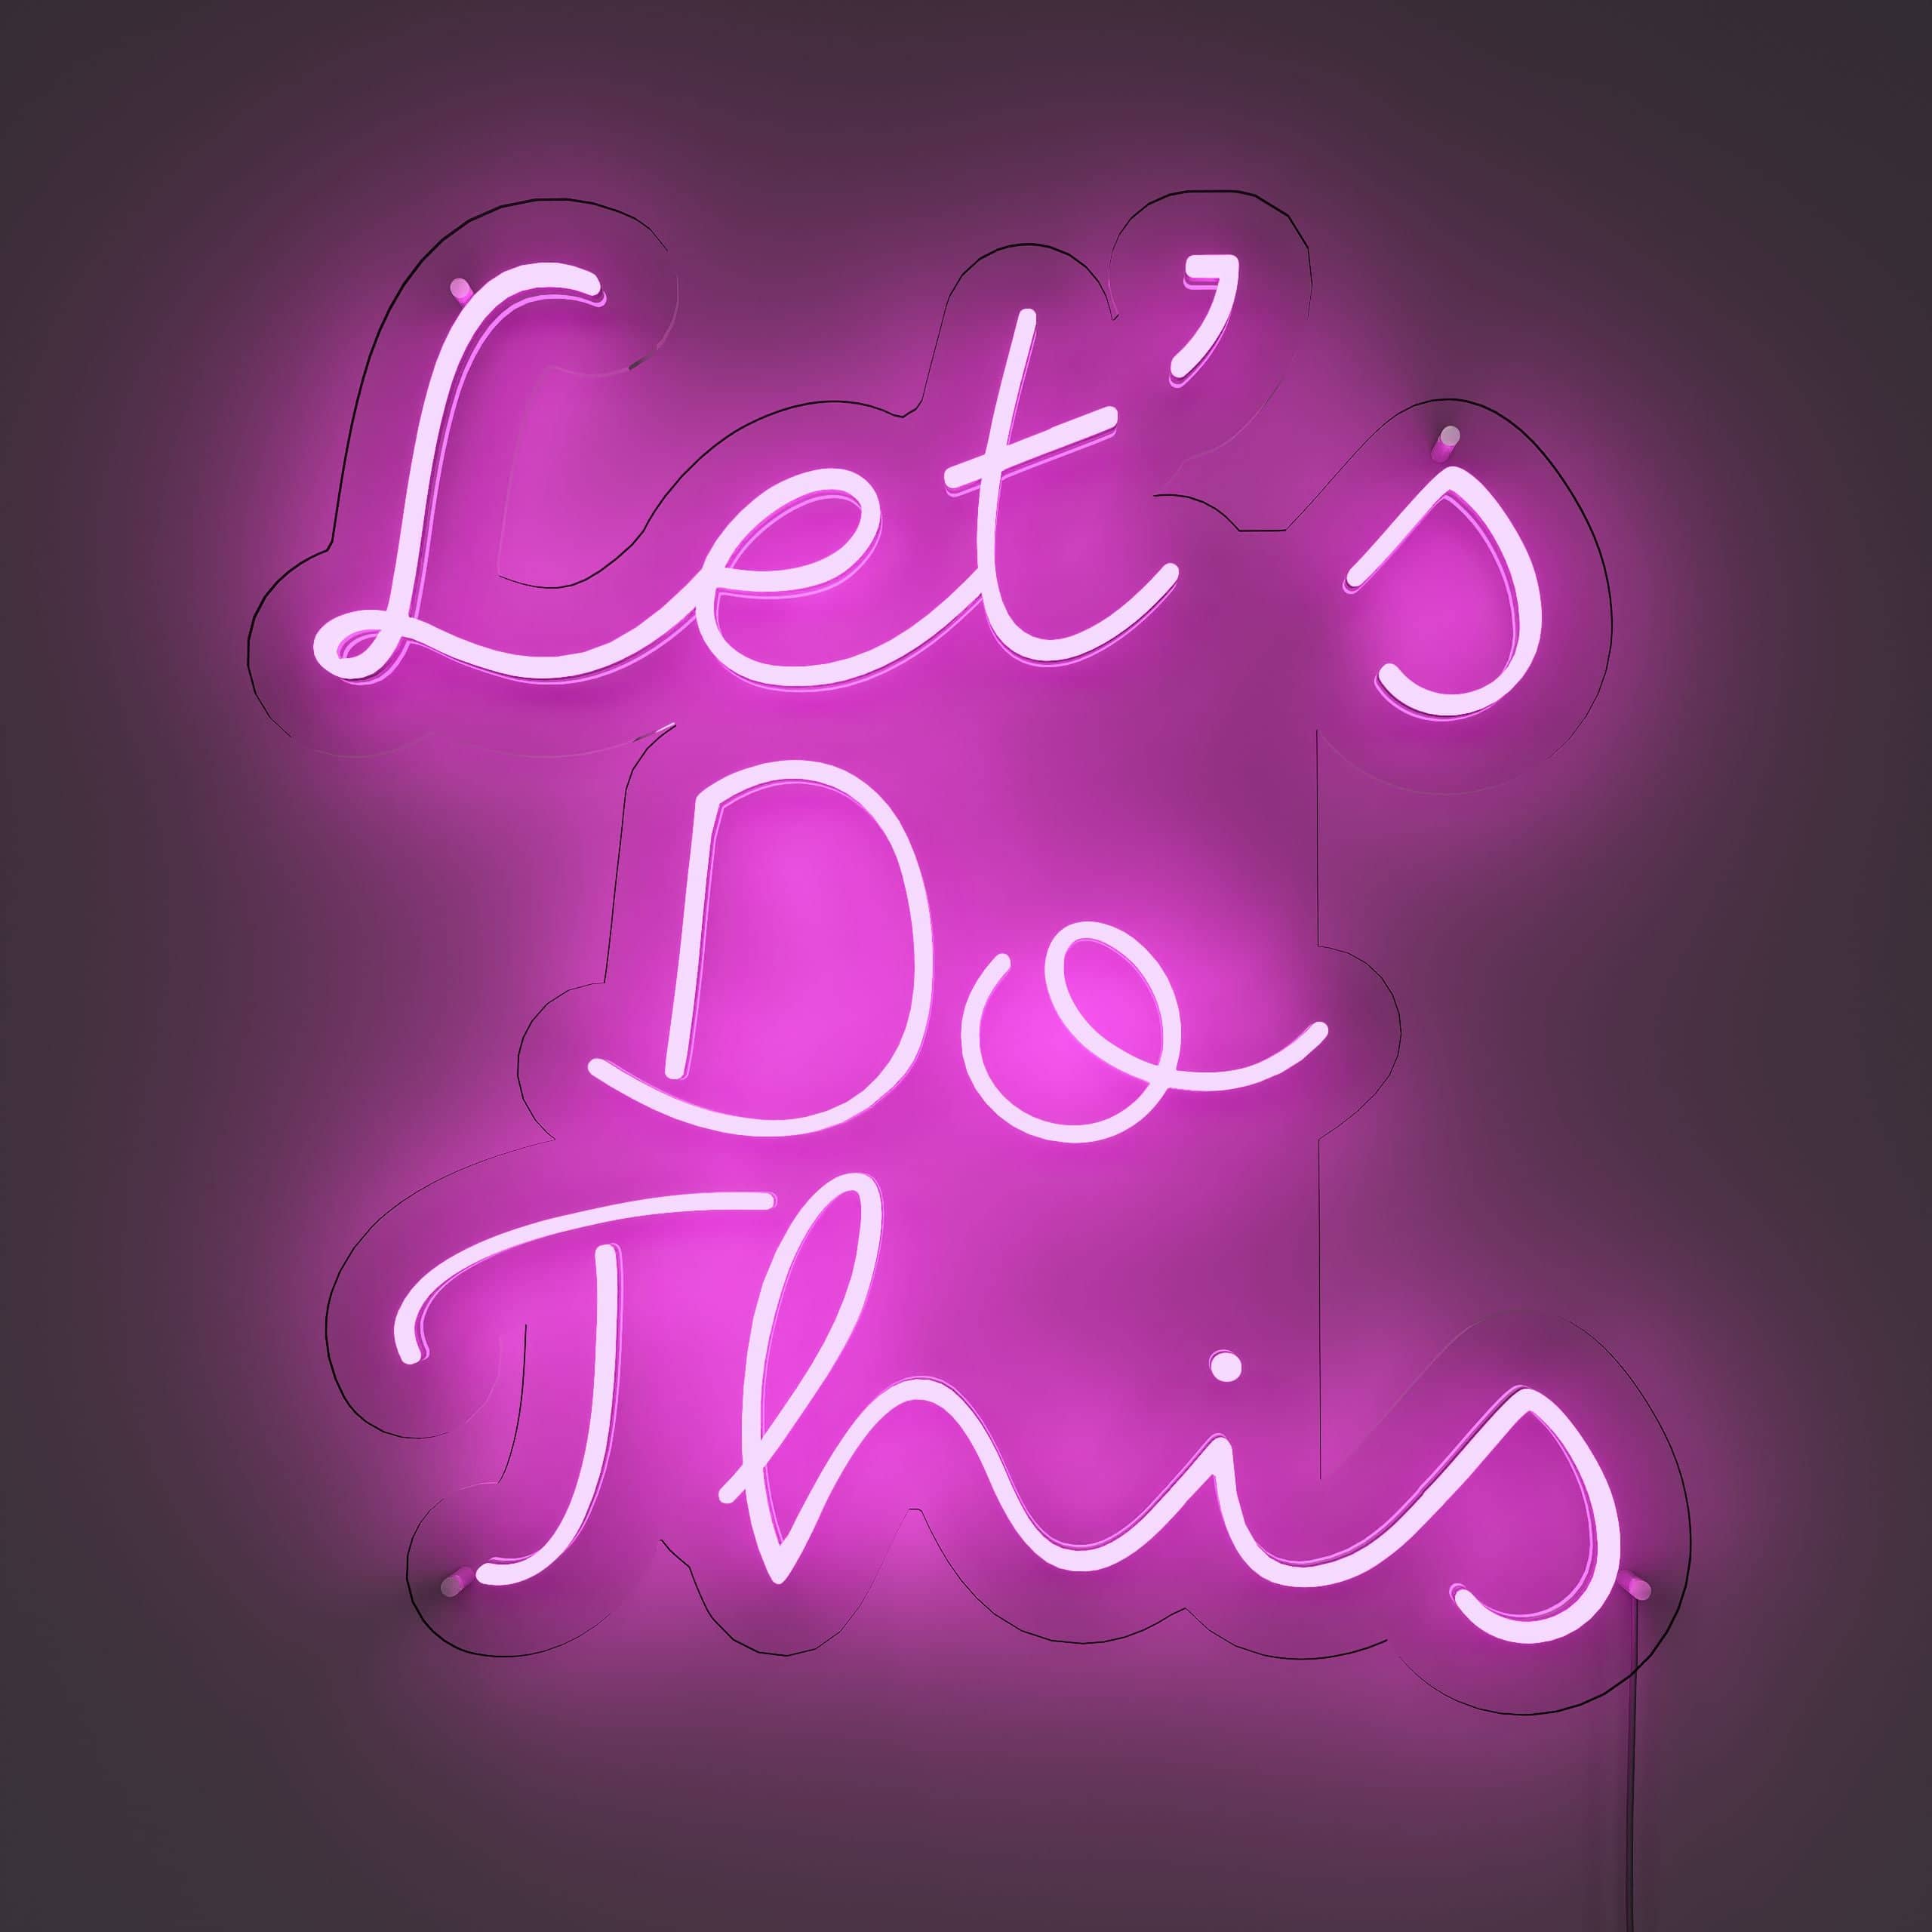 embrace-the-opportunity,-let's-succeed-neon-sign-lite